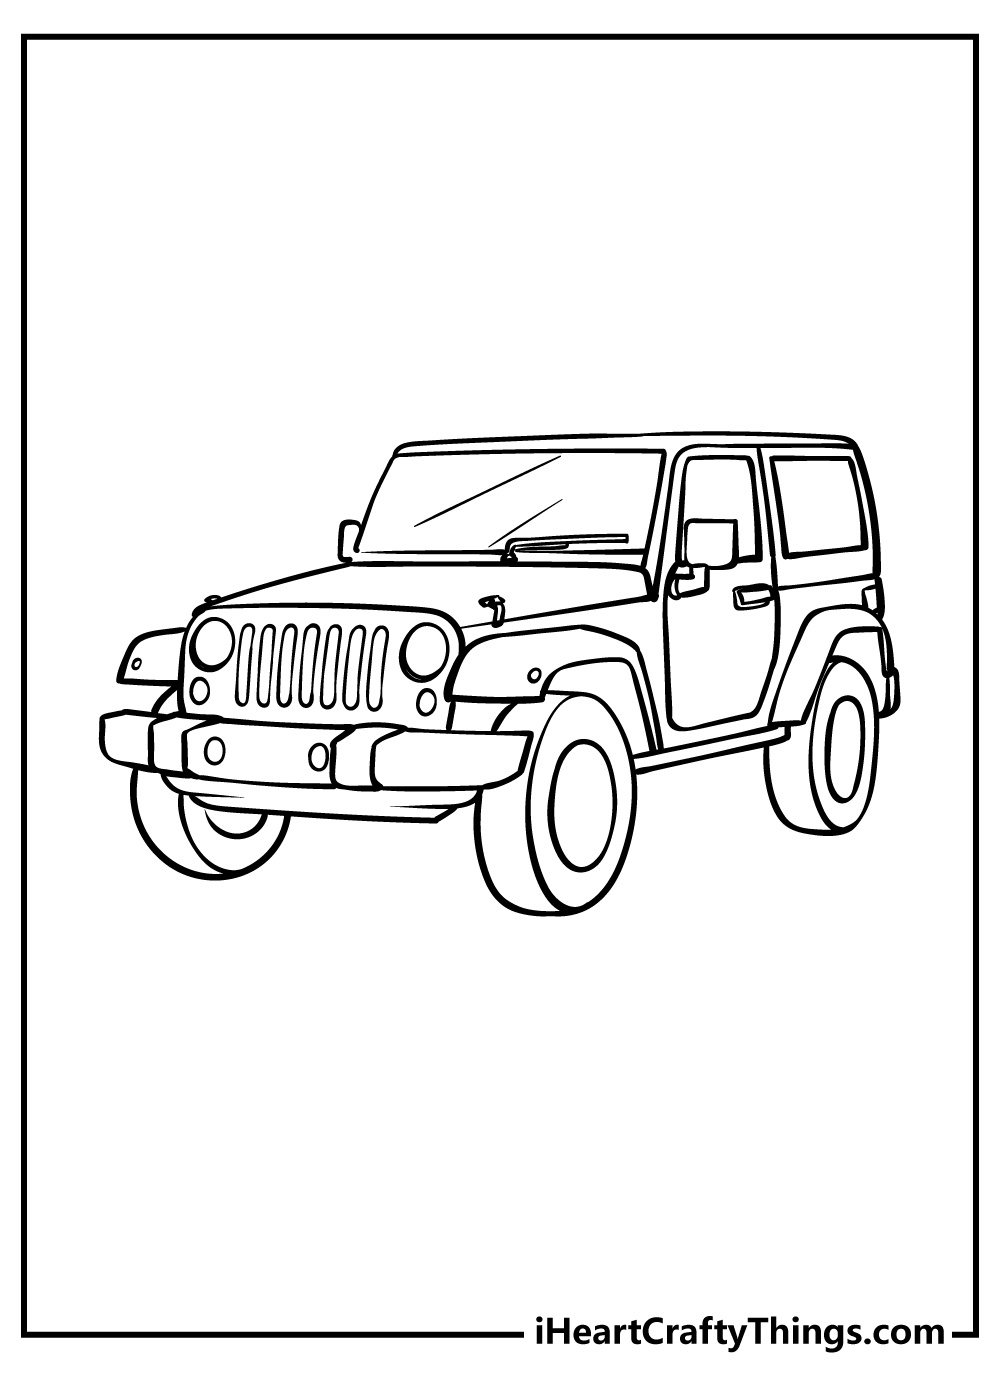 Jeep coloring pages free printables